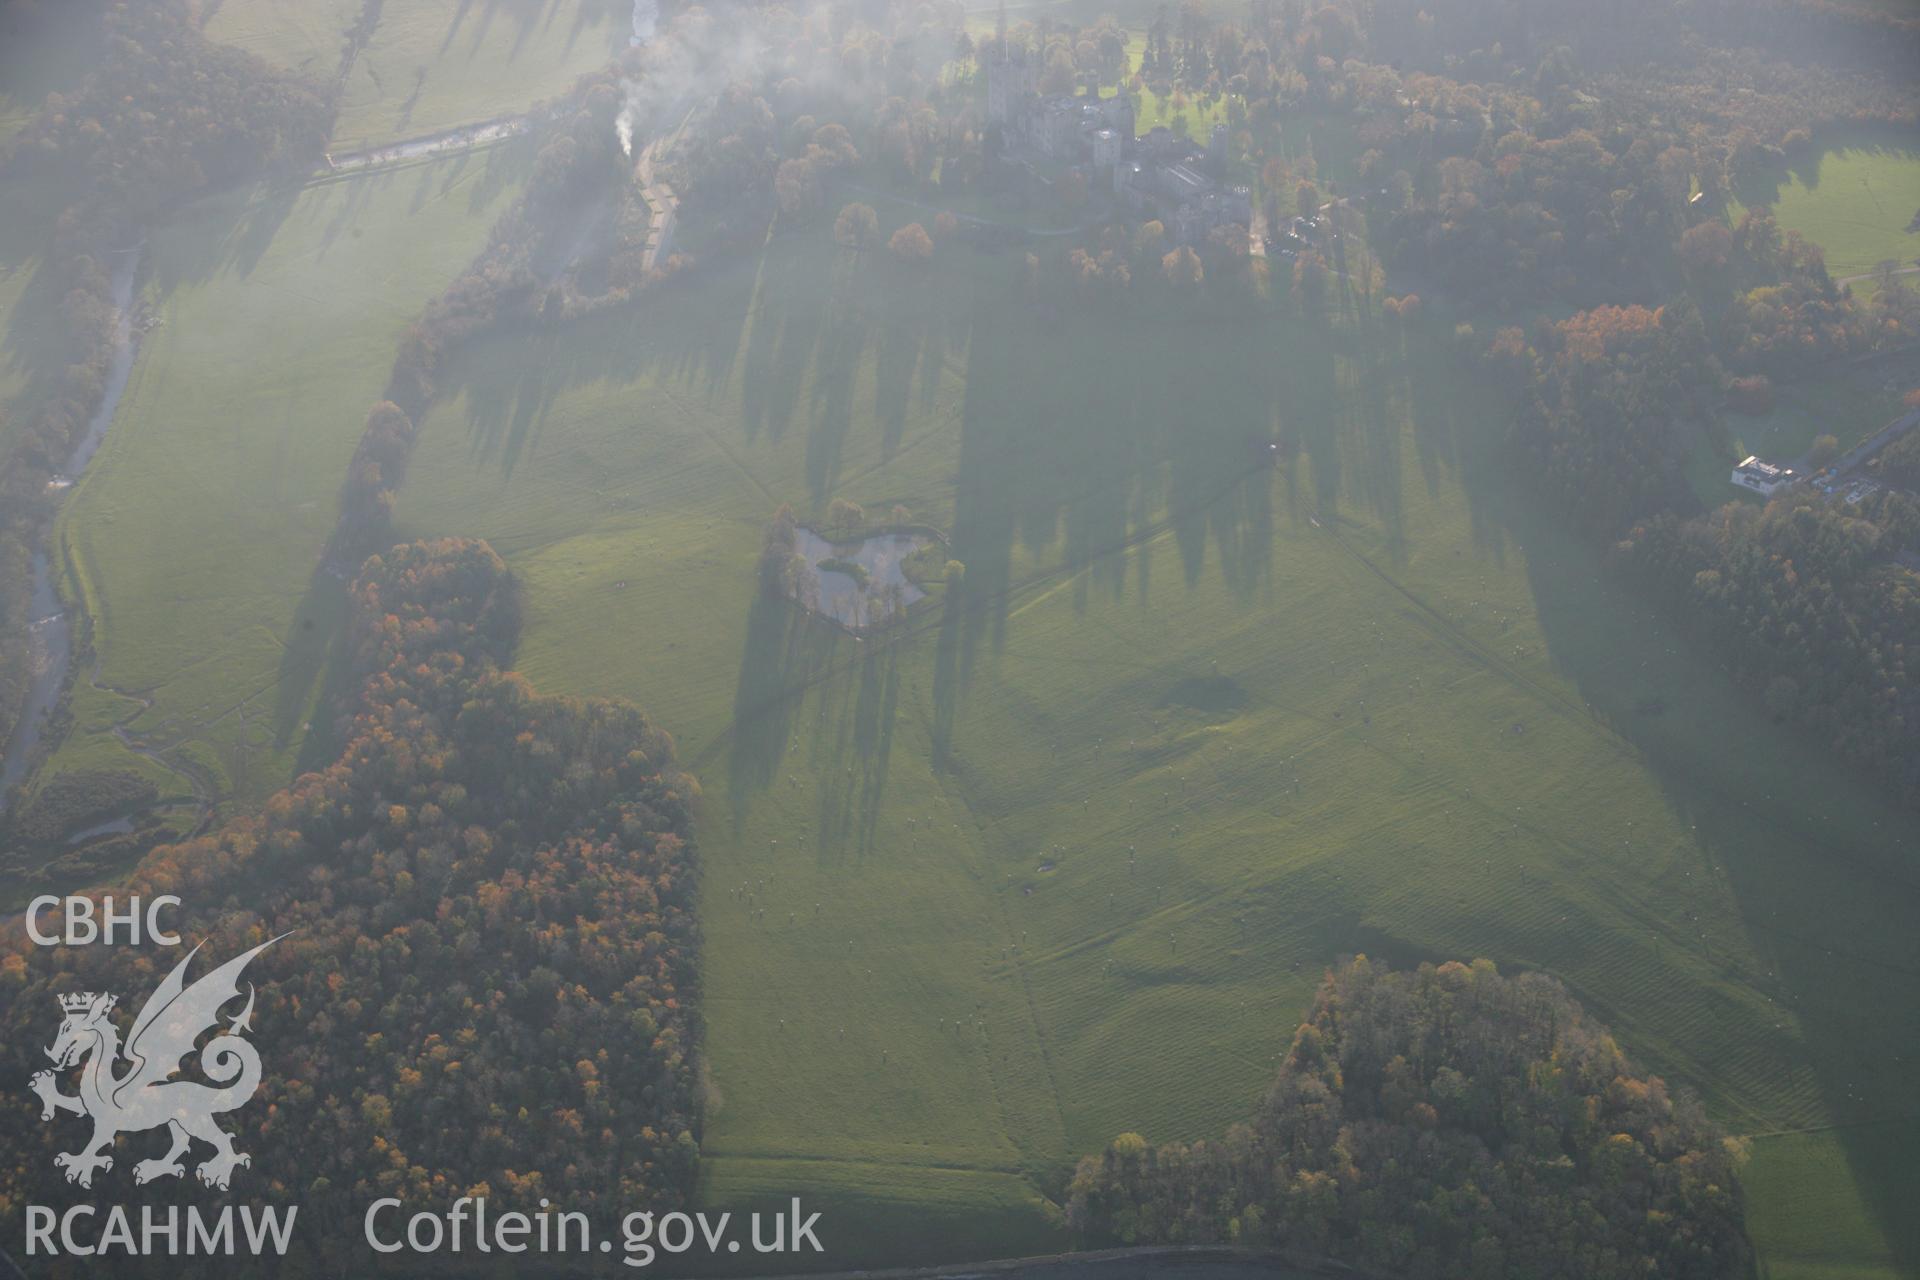 RCAHMW colour oblique aerial photograph of Penrhyn Castle Garden, Bangor, showing earthworks, viewed from the north-east. Taken on 21 November 2005 by Toby Driver